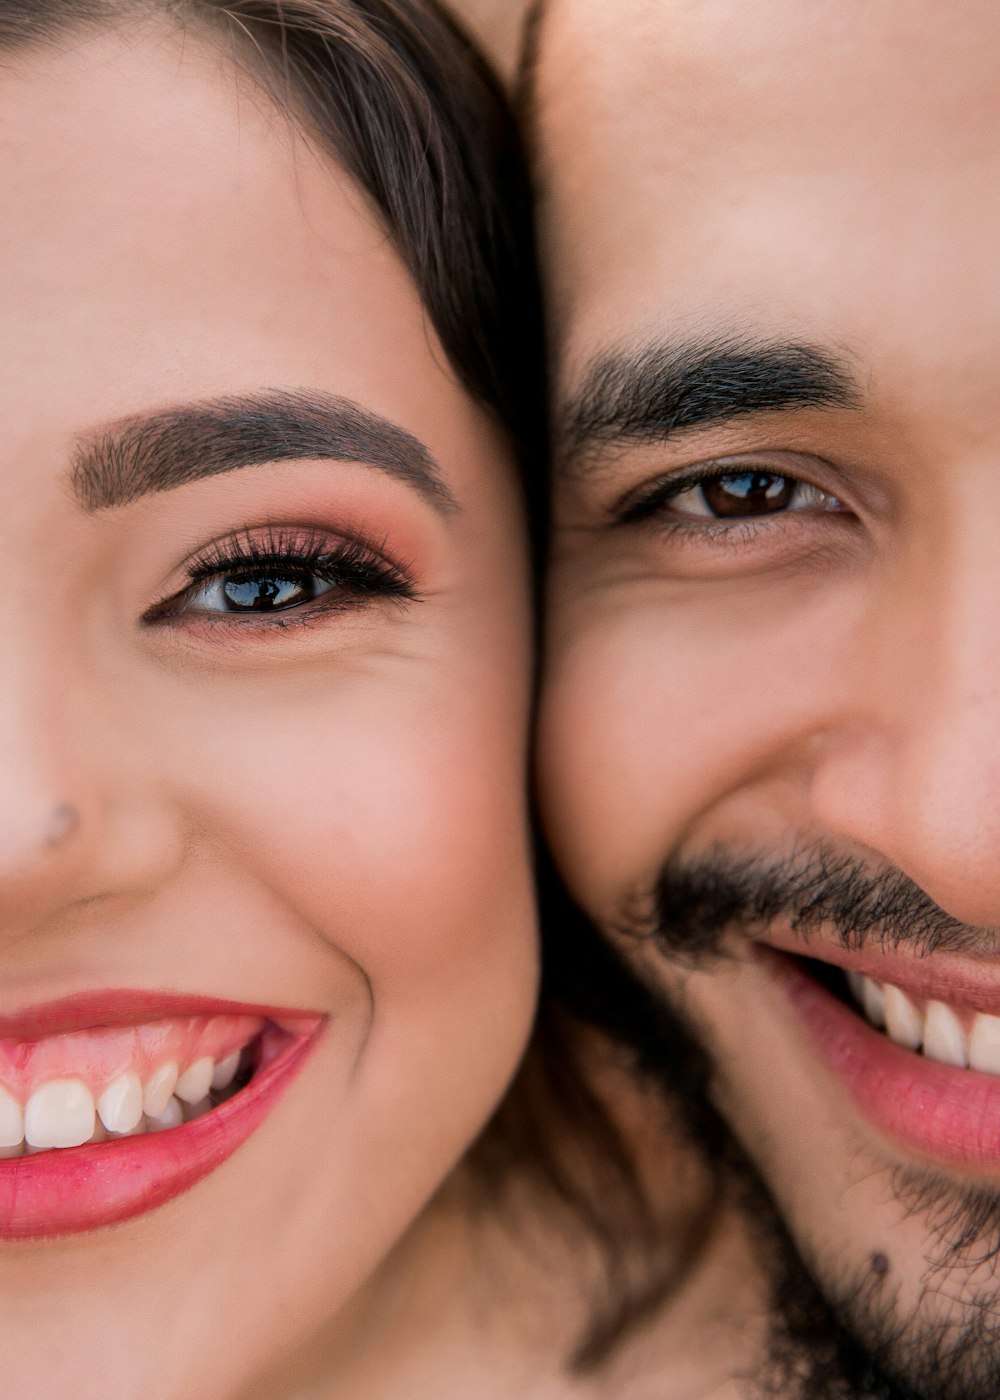 man and woman smiling while taking selfie